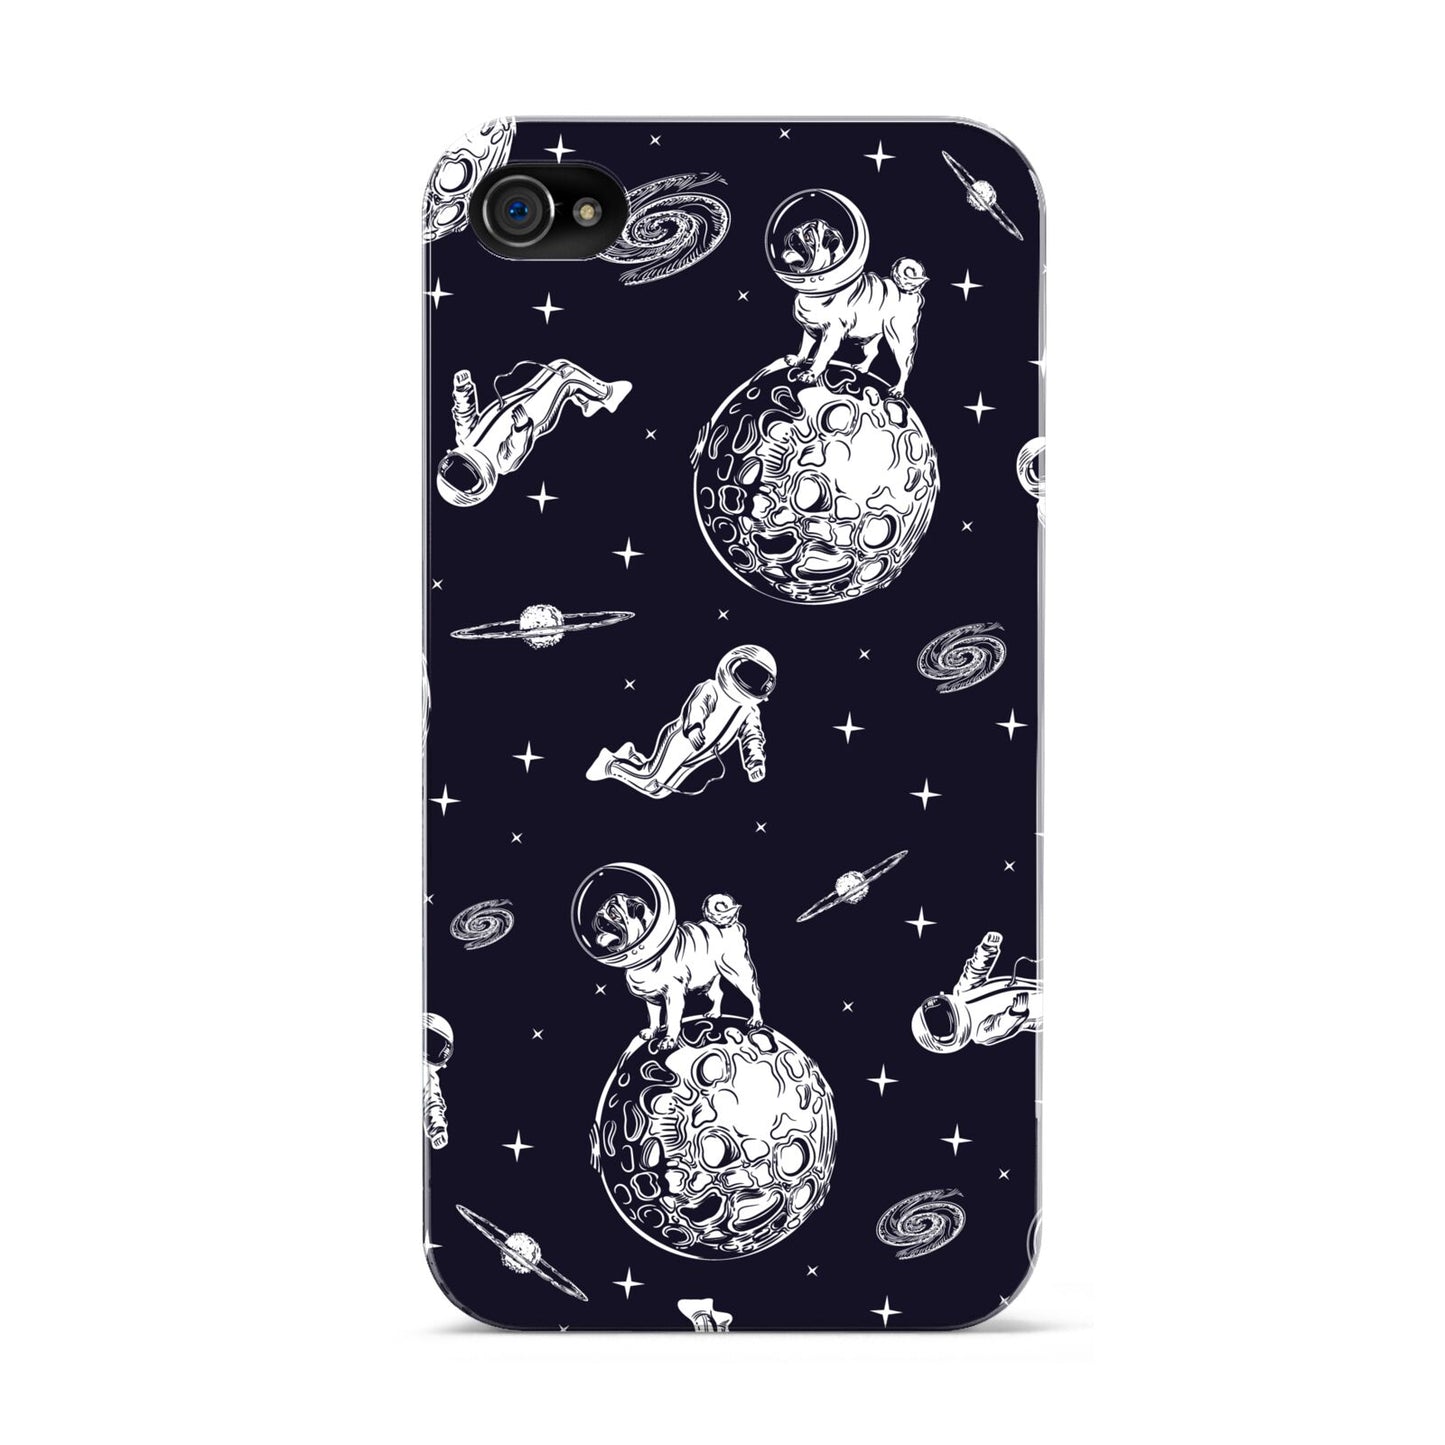 Pug in Space Apple iPhone 4s Case